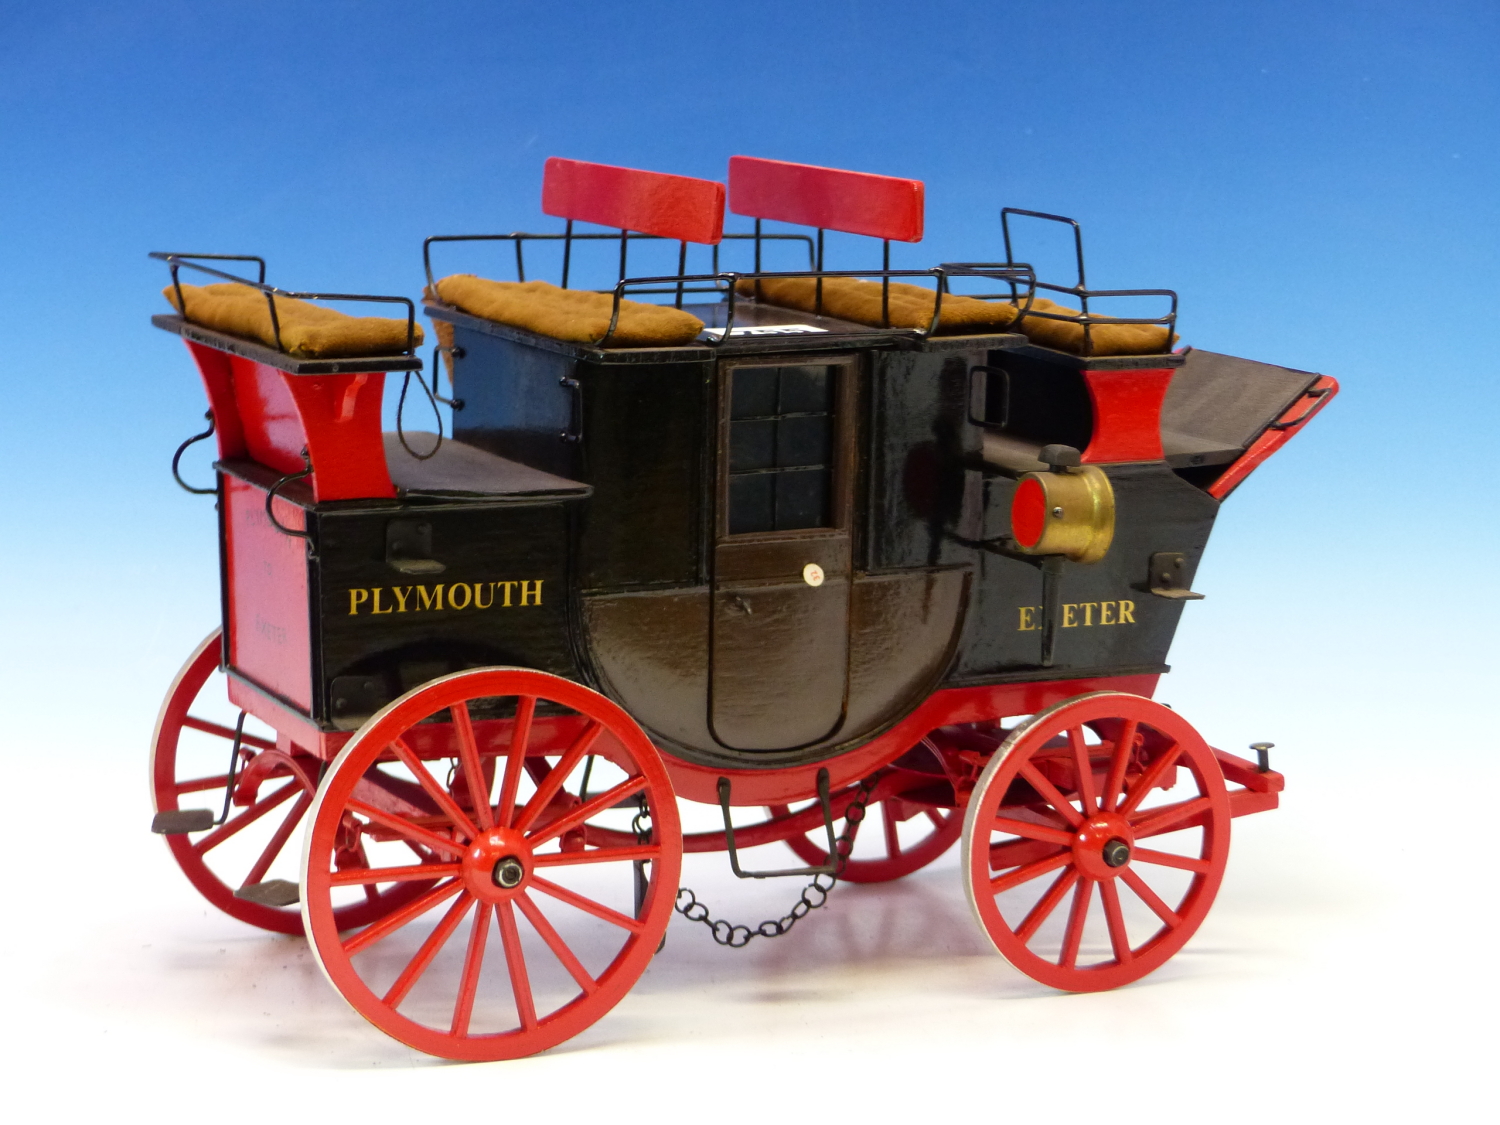 A SCALE MODEL OF A SIGN WRITTEN PLYMOUTH, EXETER CARRIAGE. APPROX LENGTH 35cms.